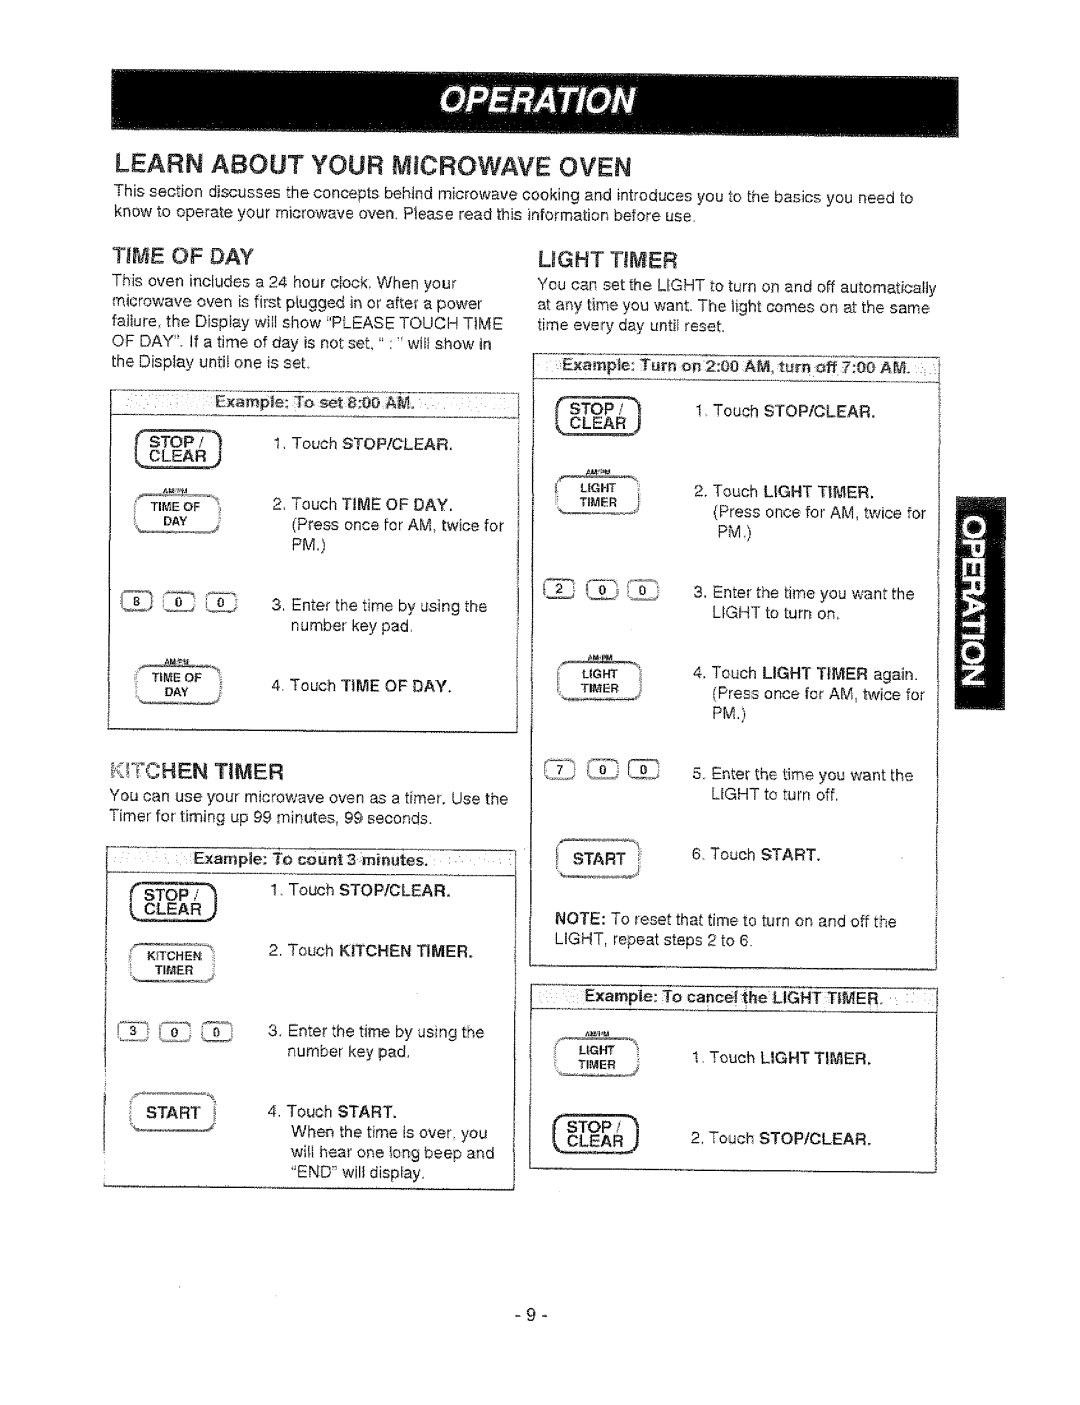 Sears 721.67601, 721.67602 owner manual Time Of Day, Ohen T|Mer, Ught Timer, Learn About Your Microwave Oven 